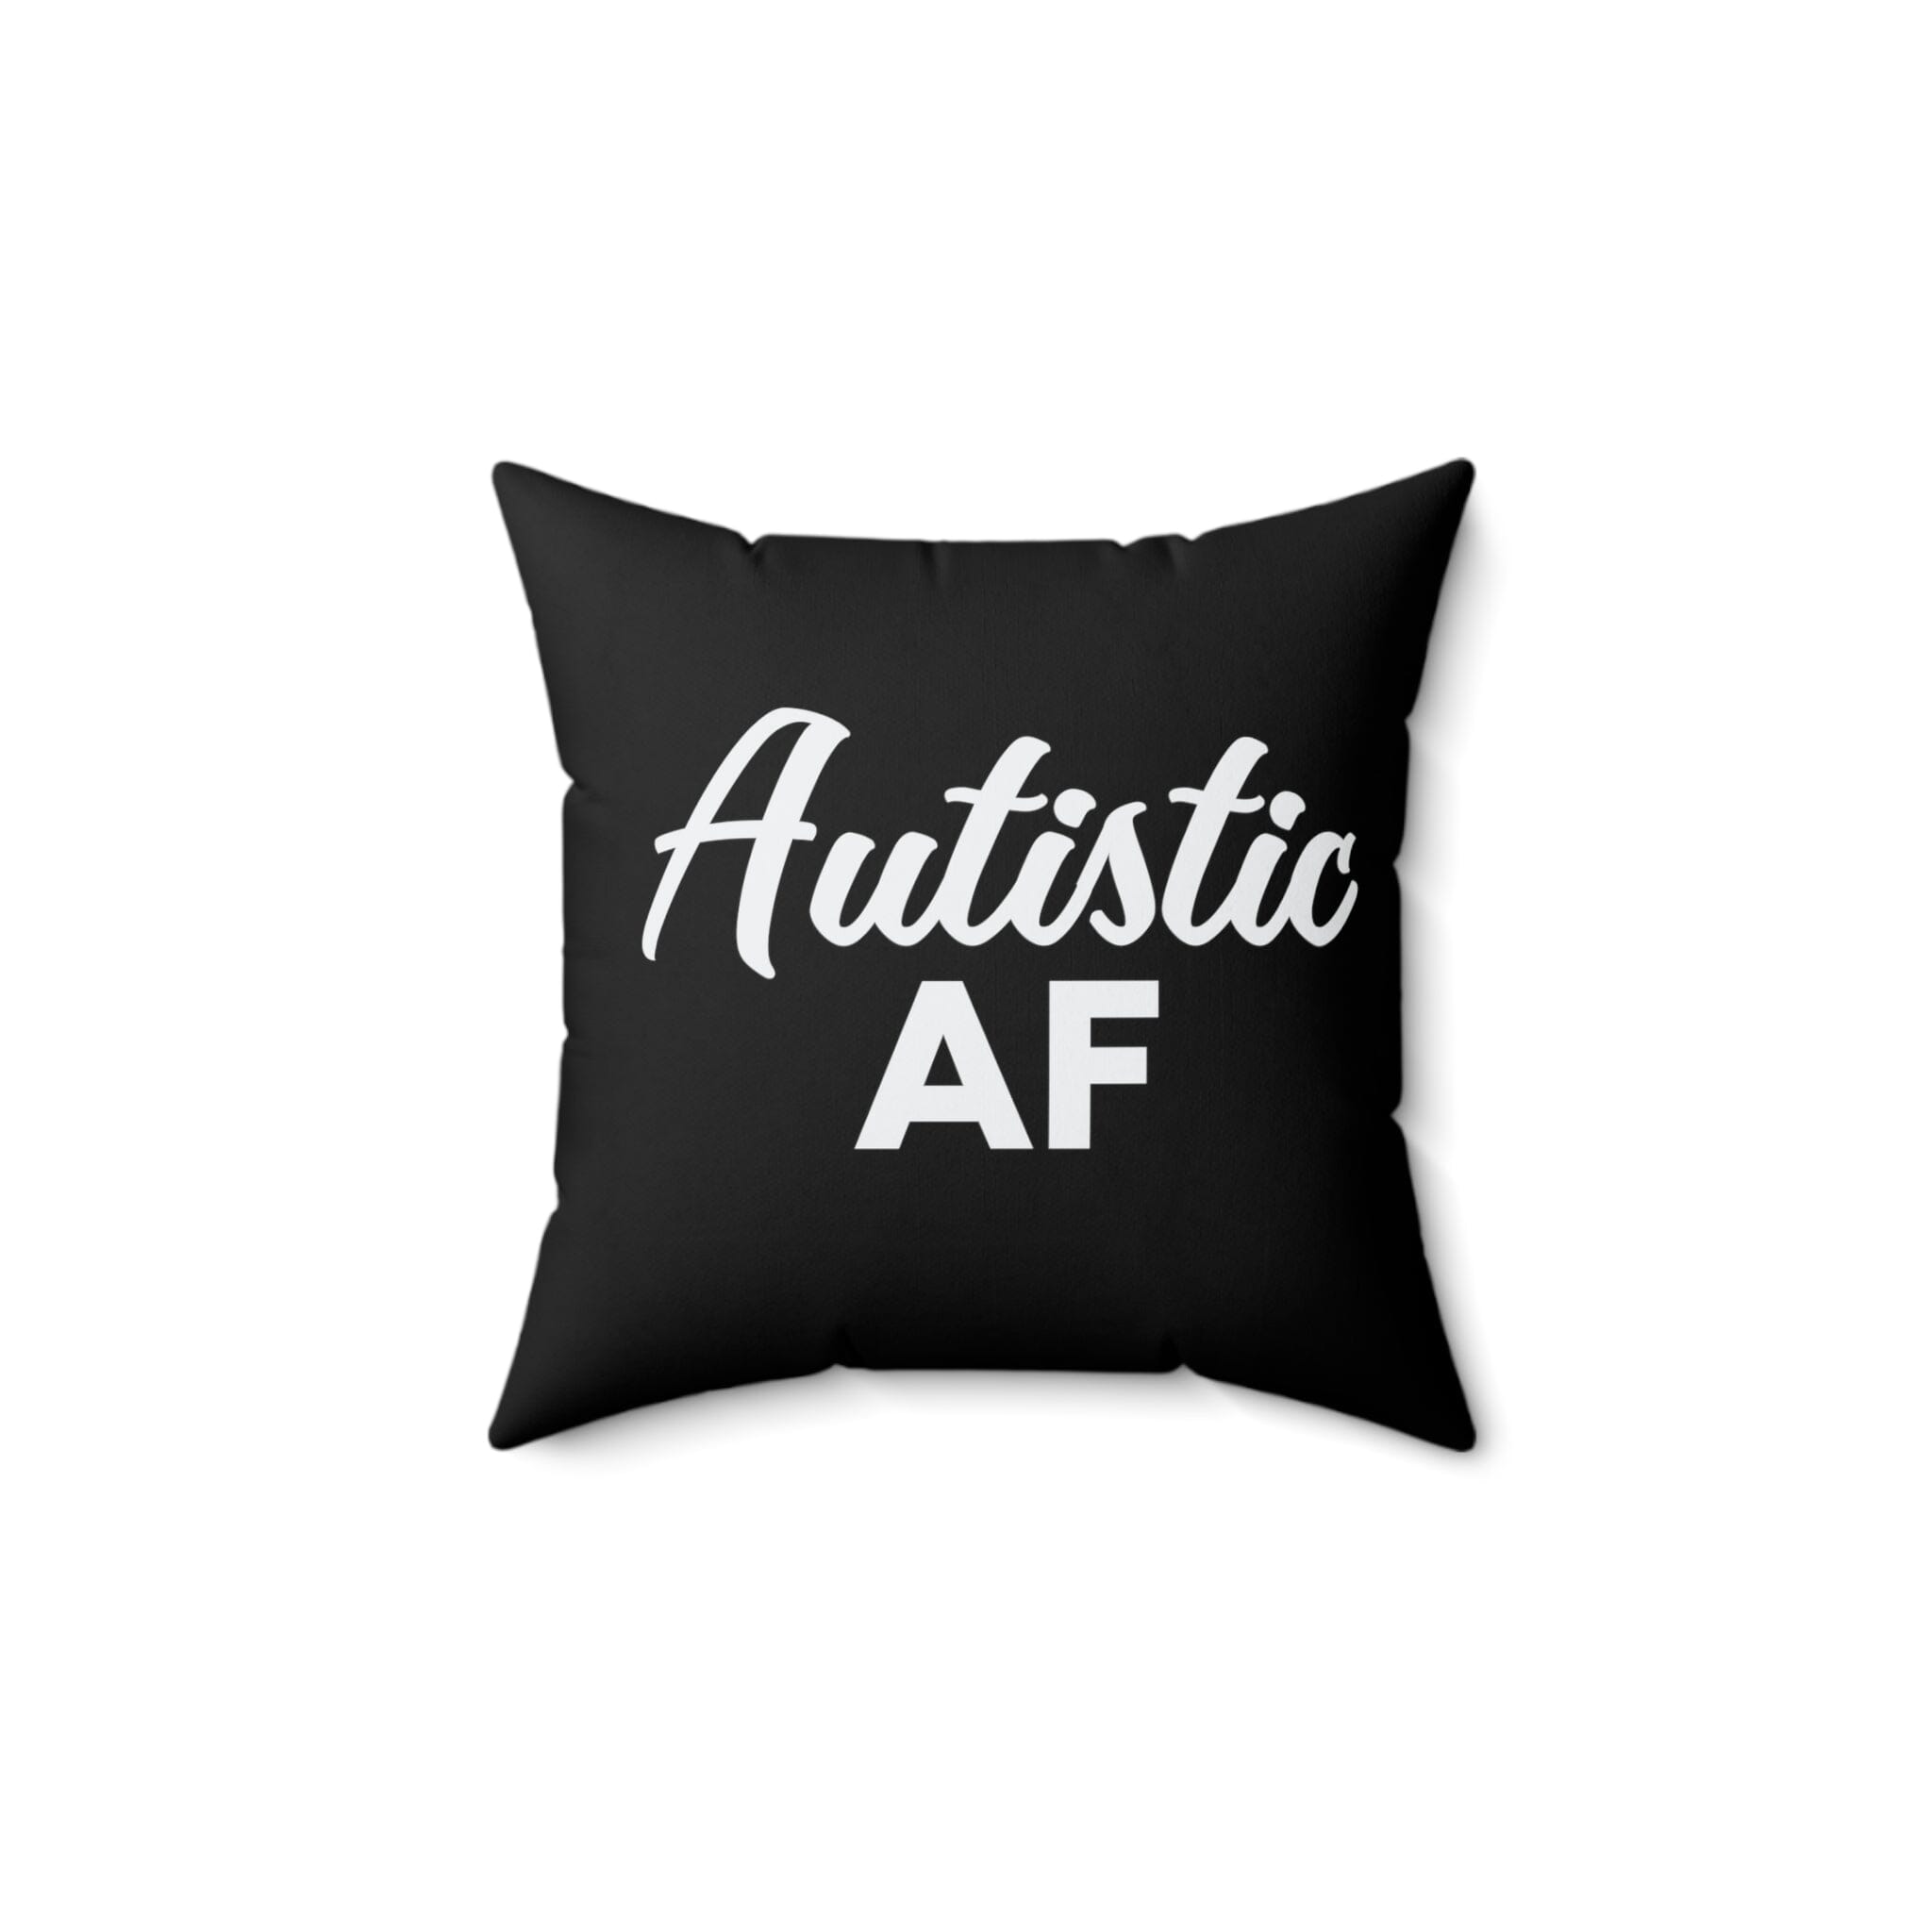 Autistic AF Pillow Home Decor The Autistic Innovator 14" × 14" 